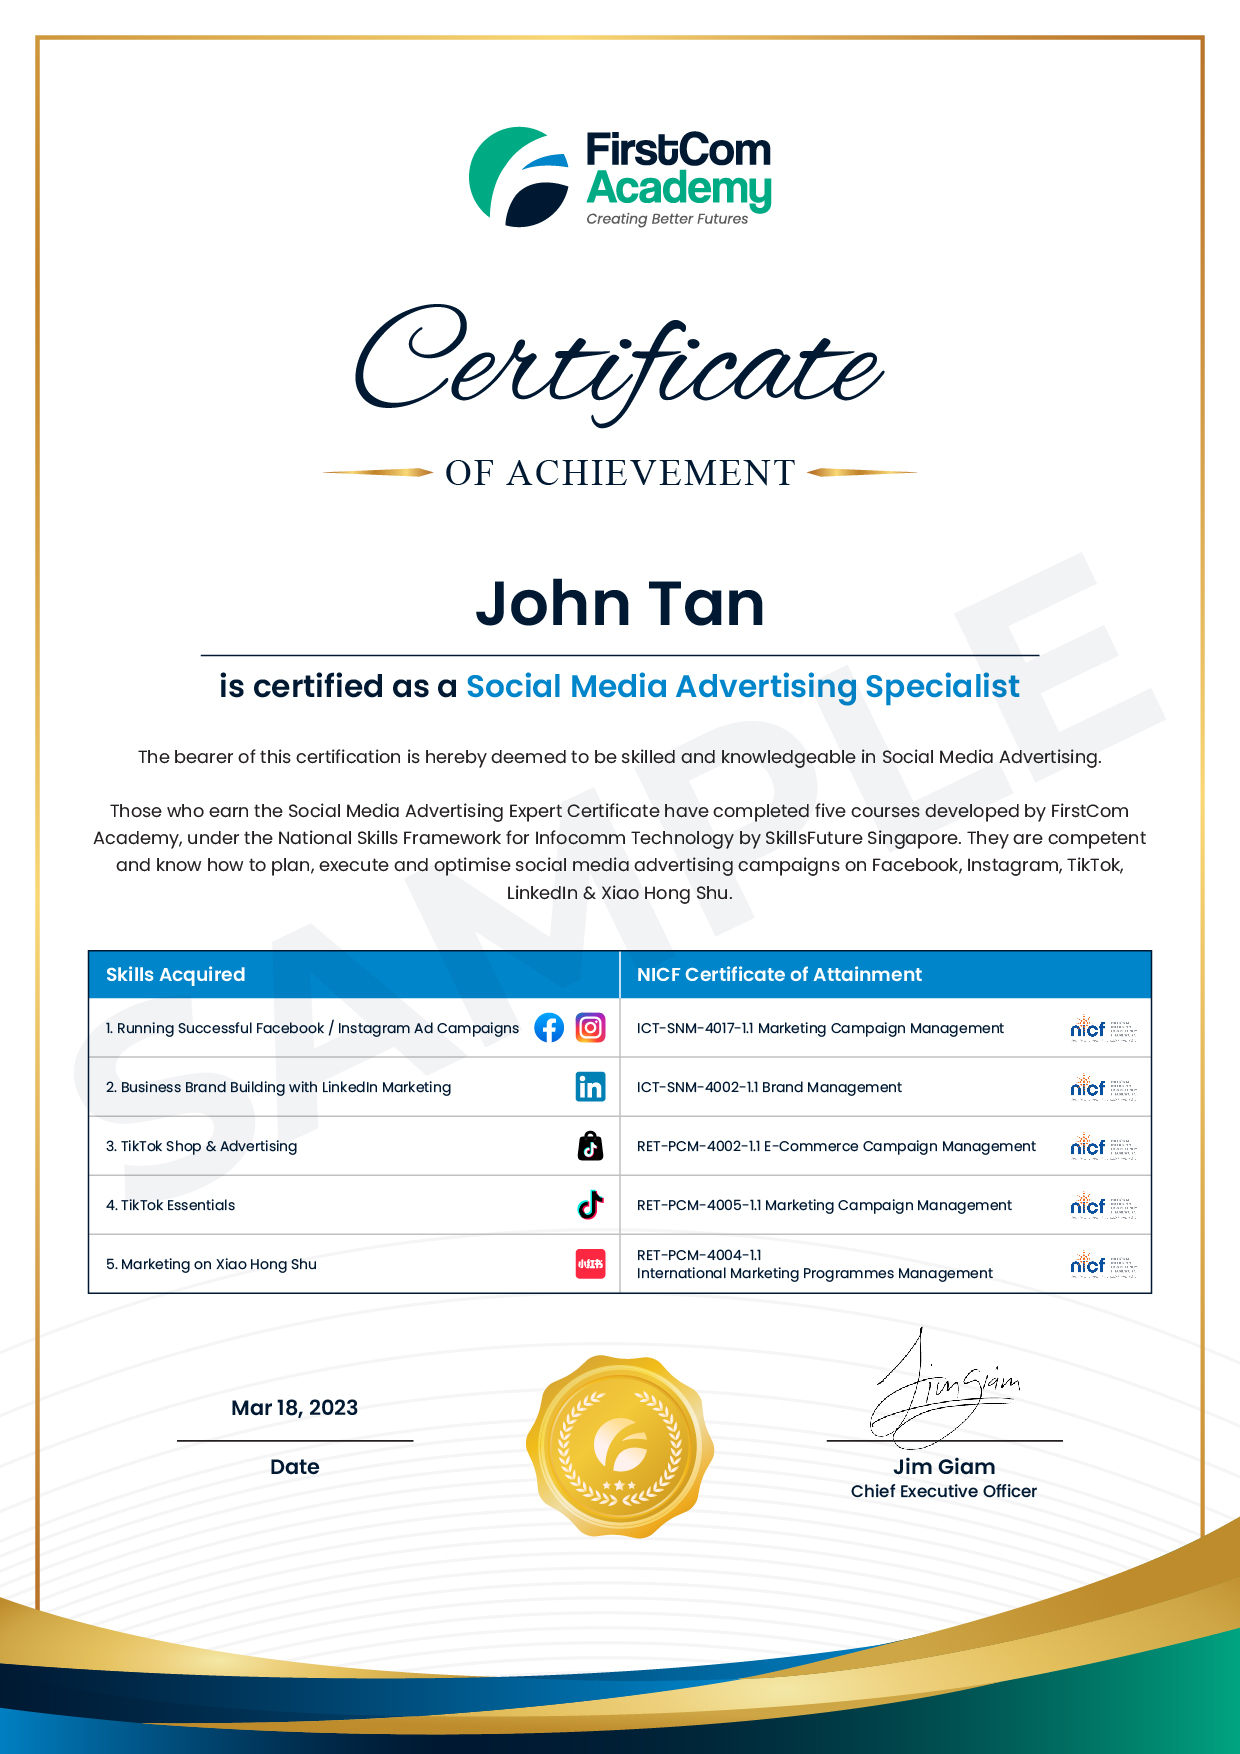 Social Media Advertising Specialist programme course certificate by FirstCom Academy Singapore